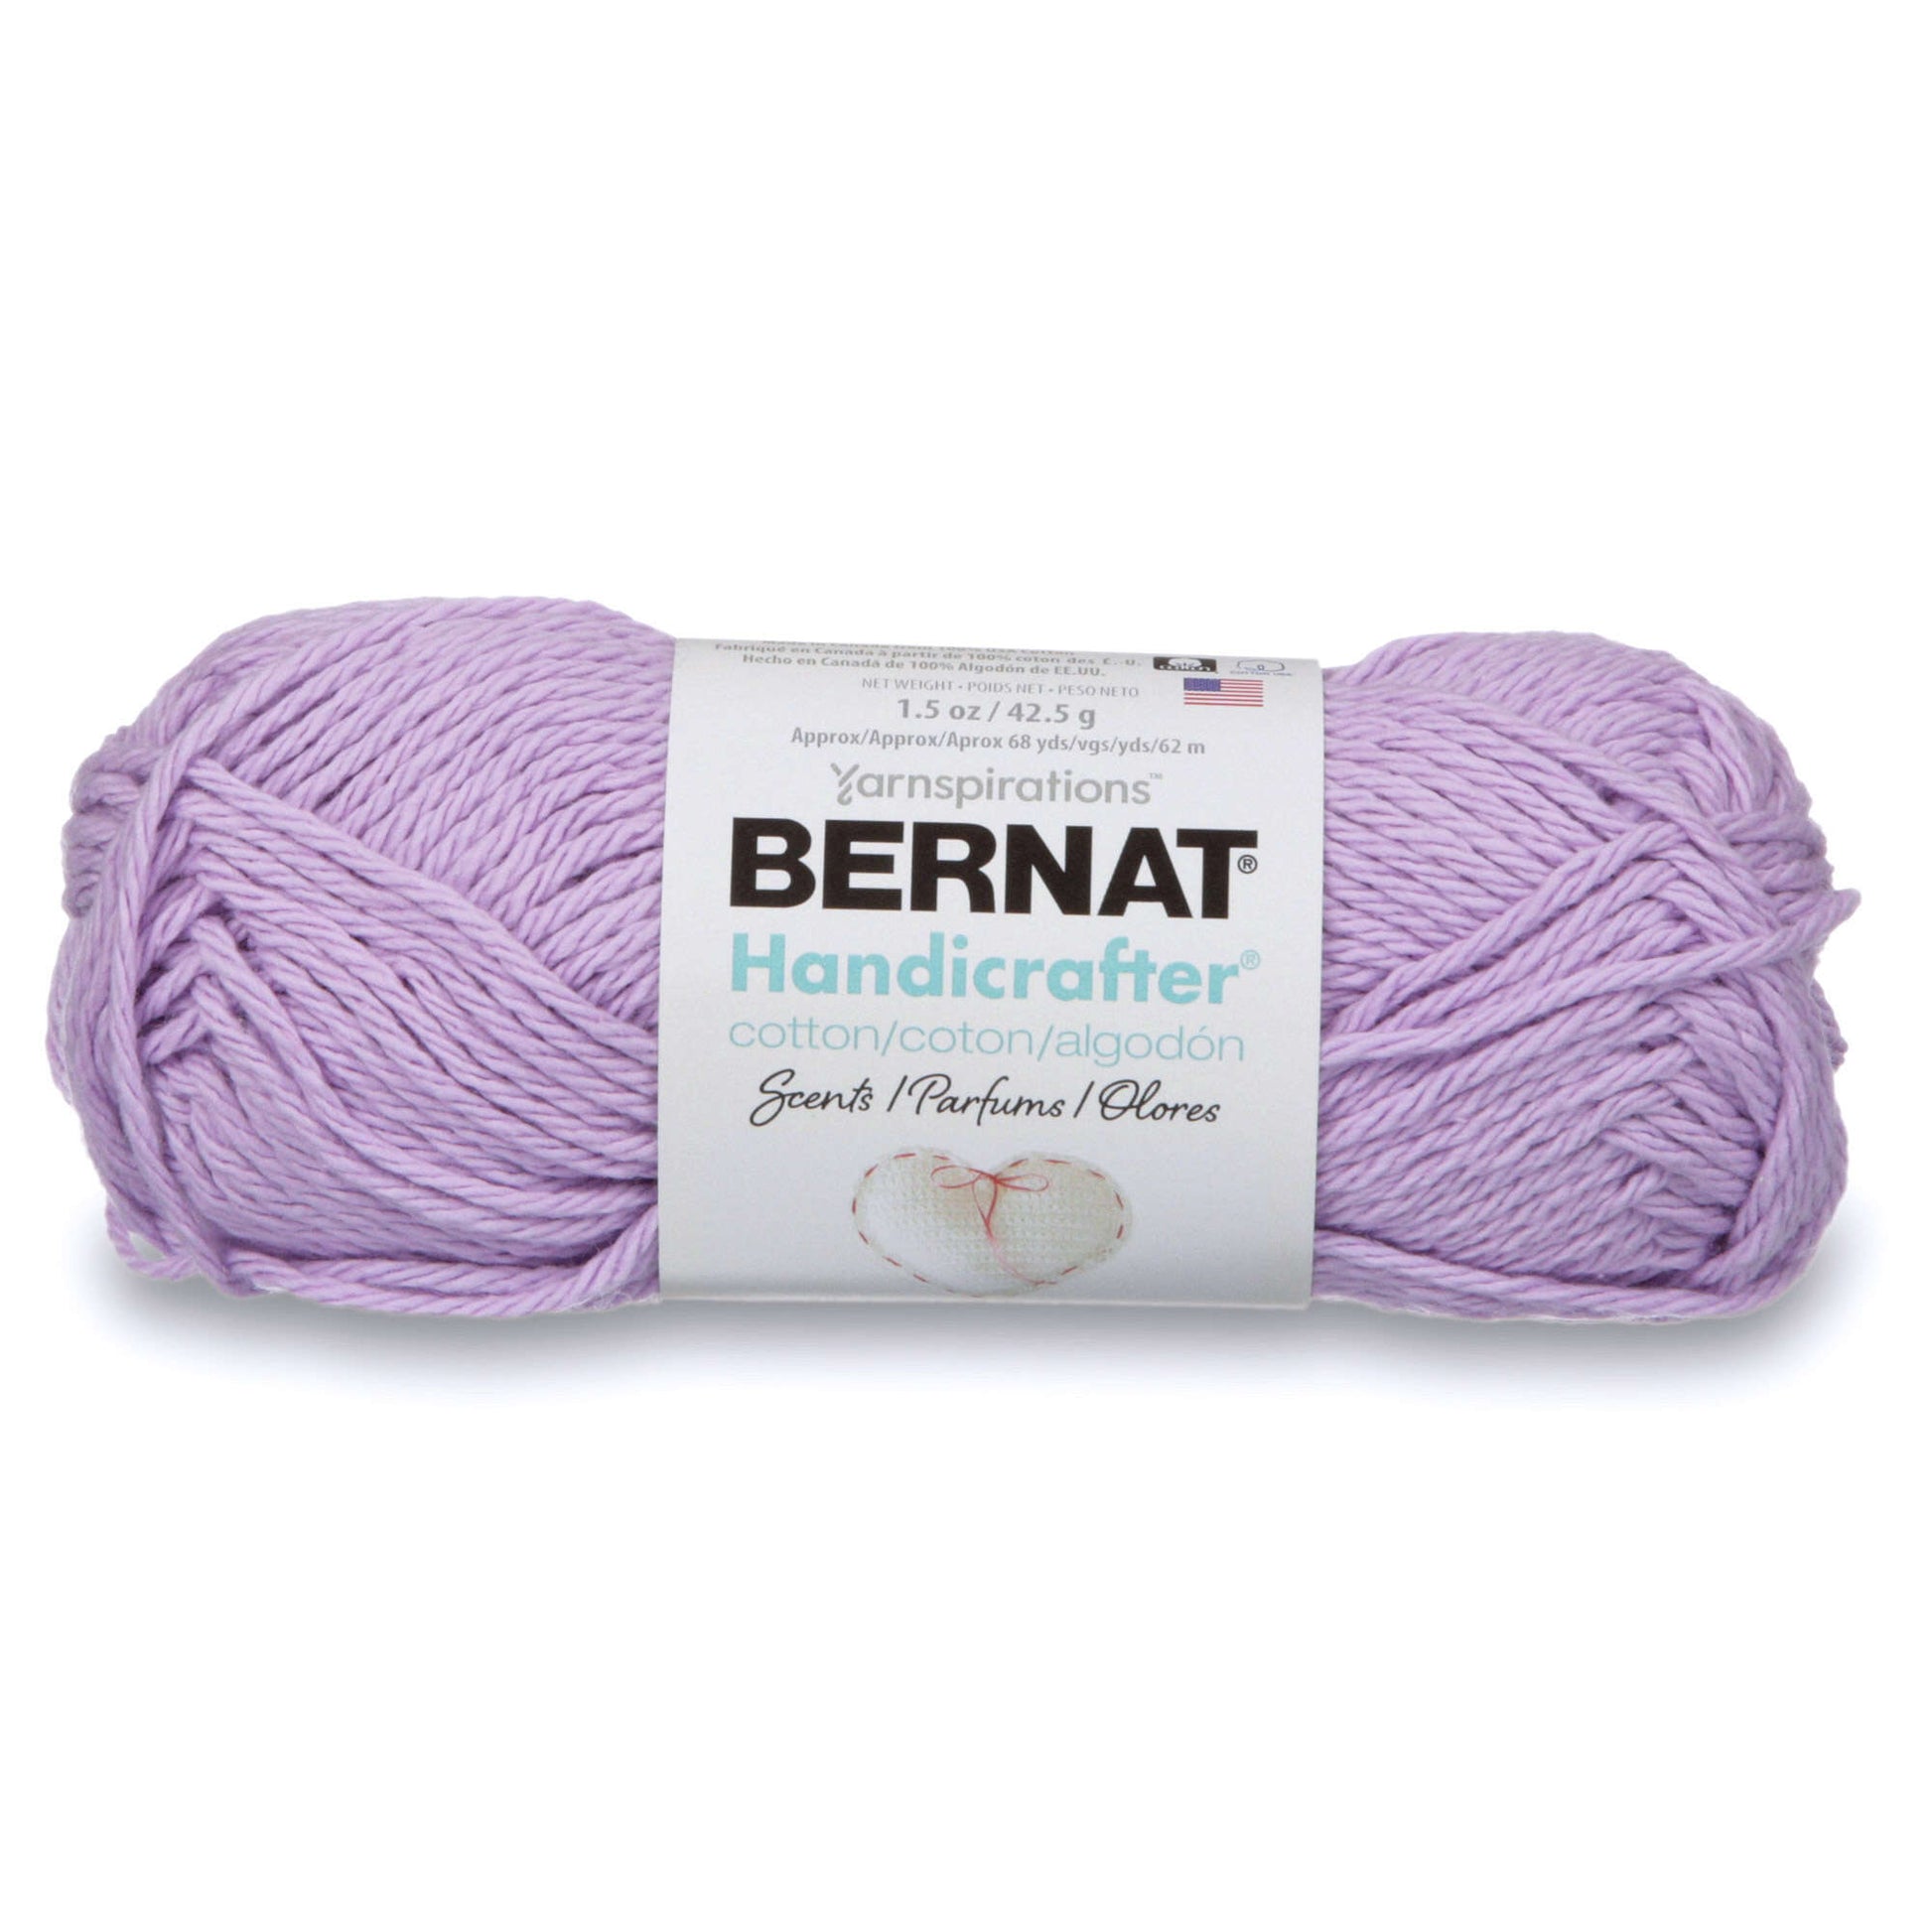 Introducing a soft 100% worsted weight cotton yarn